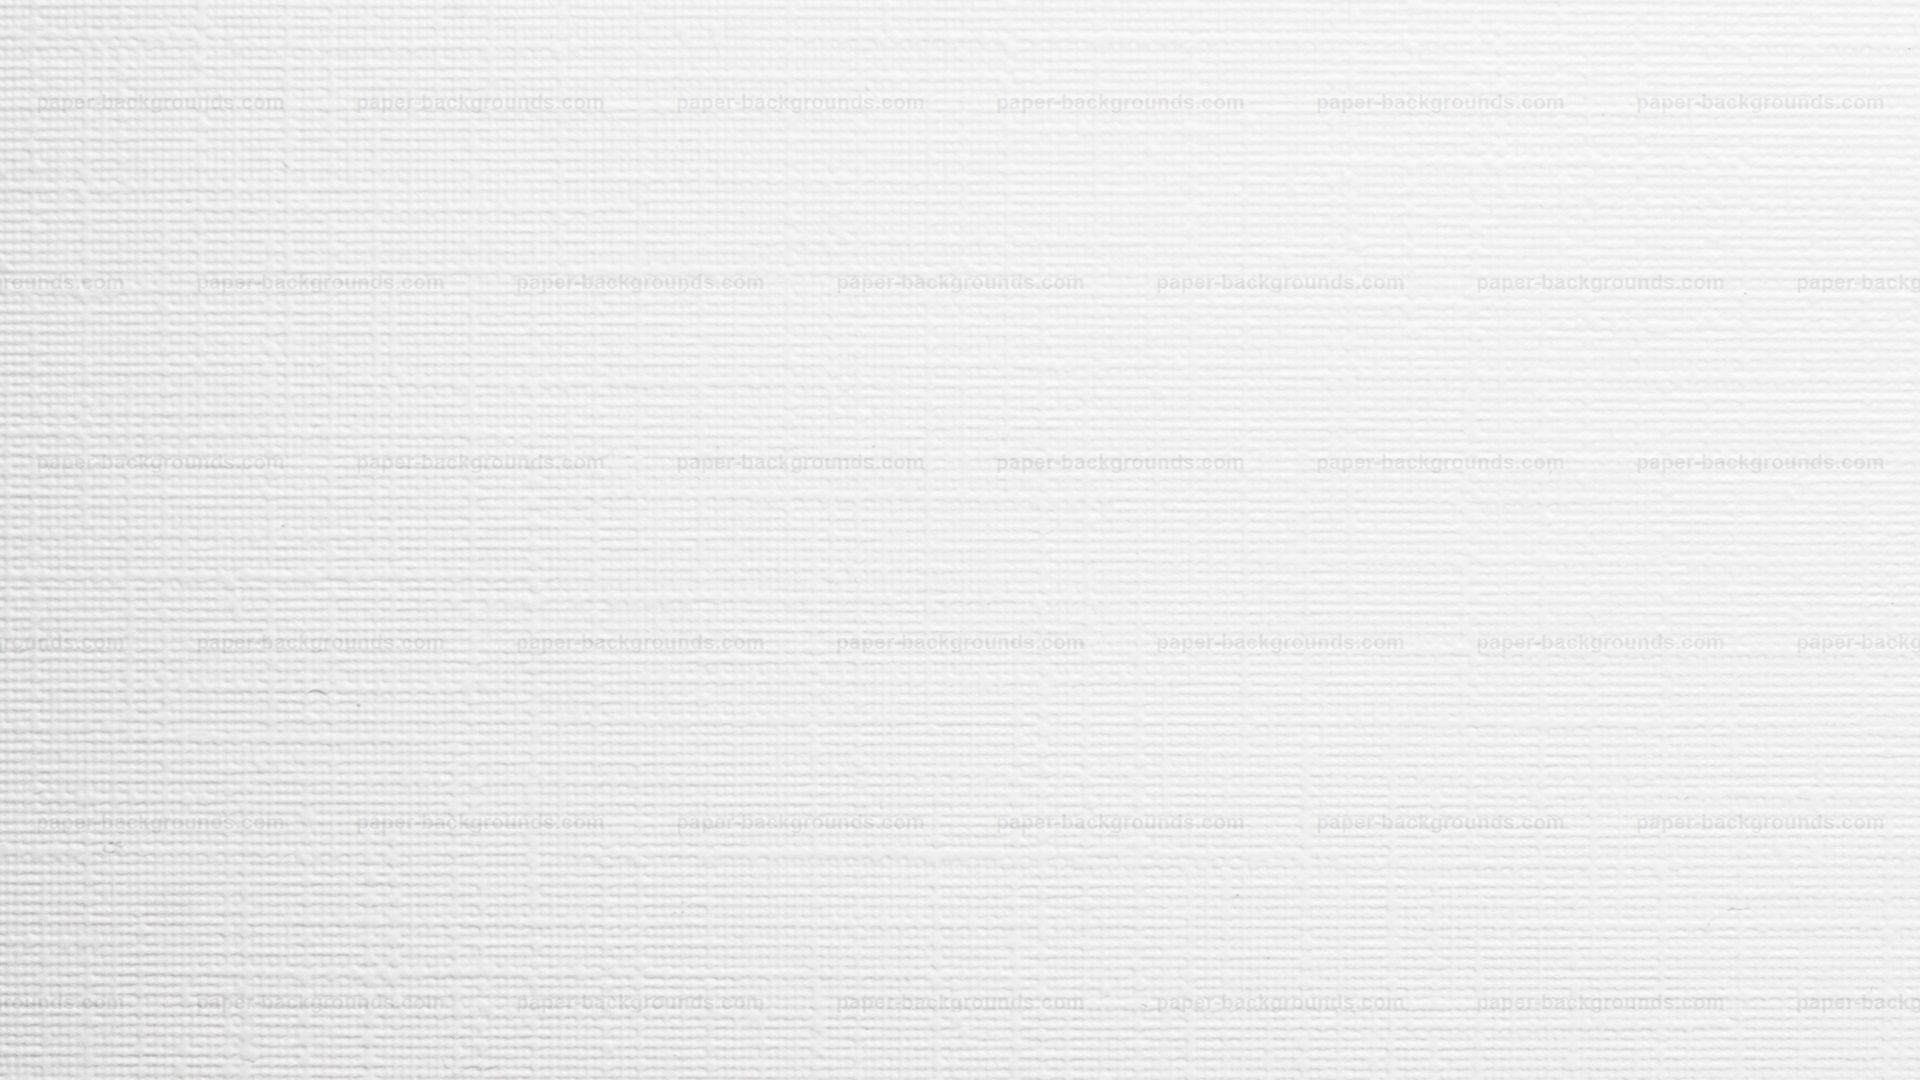 Off White Marbled Paper Background Texture Seamless